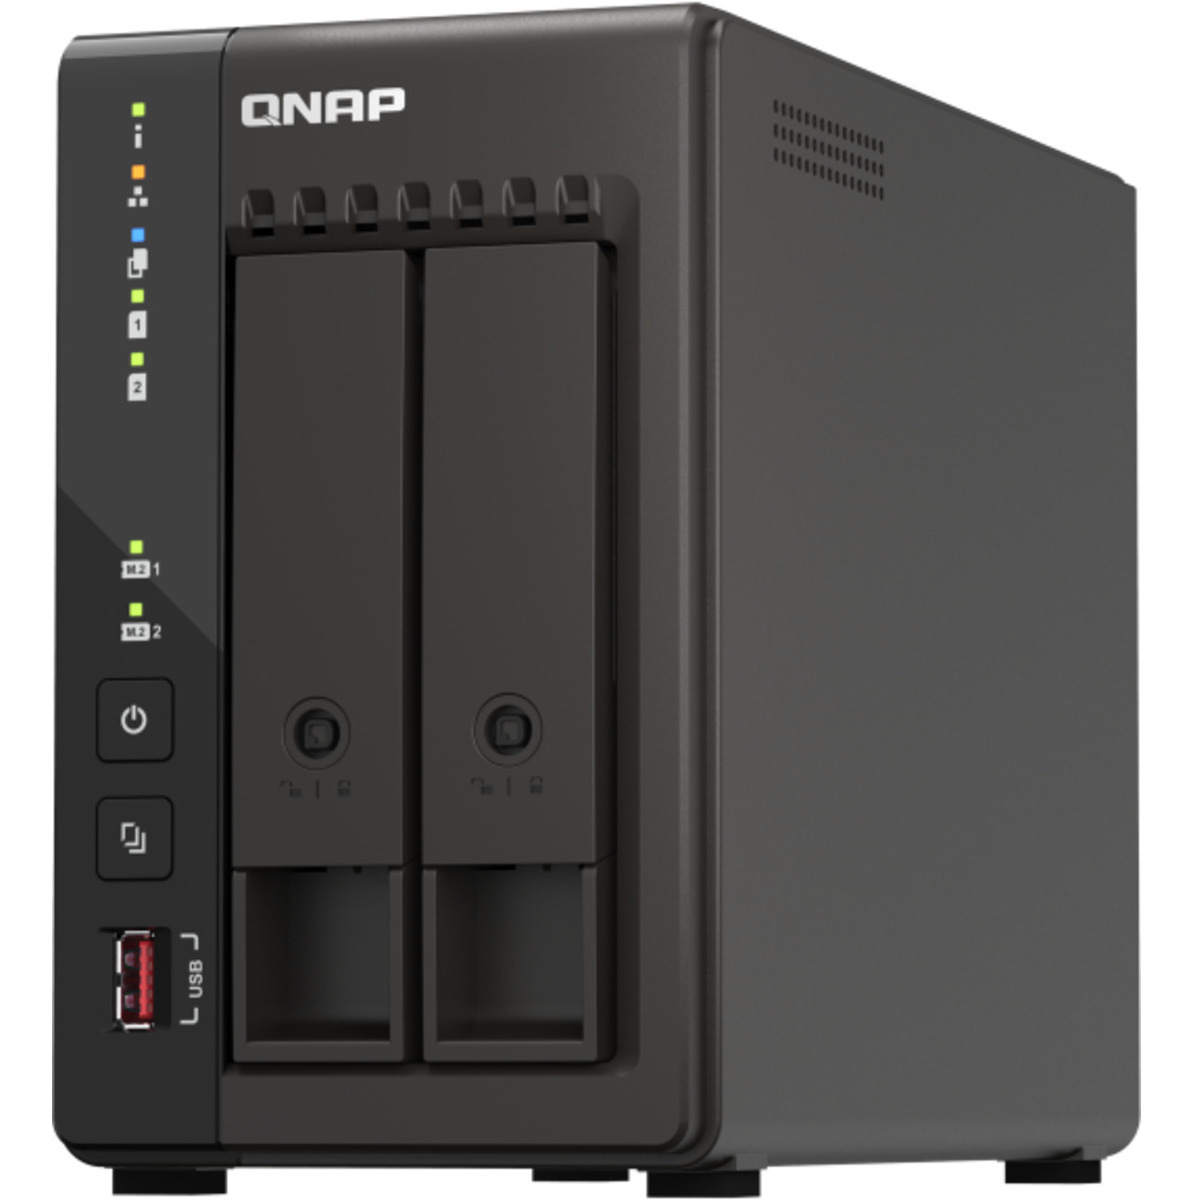 buy $701 QNAP TS-253E 8tb Desktop NAS - Network Attached Storage Device 2x4000gb Toshiba MN Series MN08ADA400E 3.5 7200rpm SATA 6Gb/s HDD NAS Class Drives Installed - Burn-In Tested - ON SALE - nas headquarters buy network attached storage server device das new raid-5 free shipping simply usa TS-253E